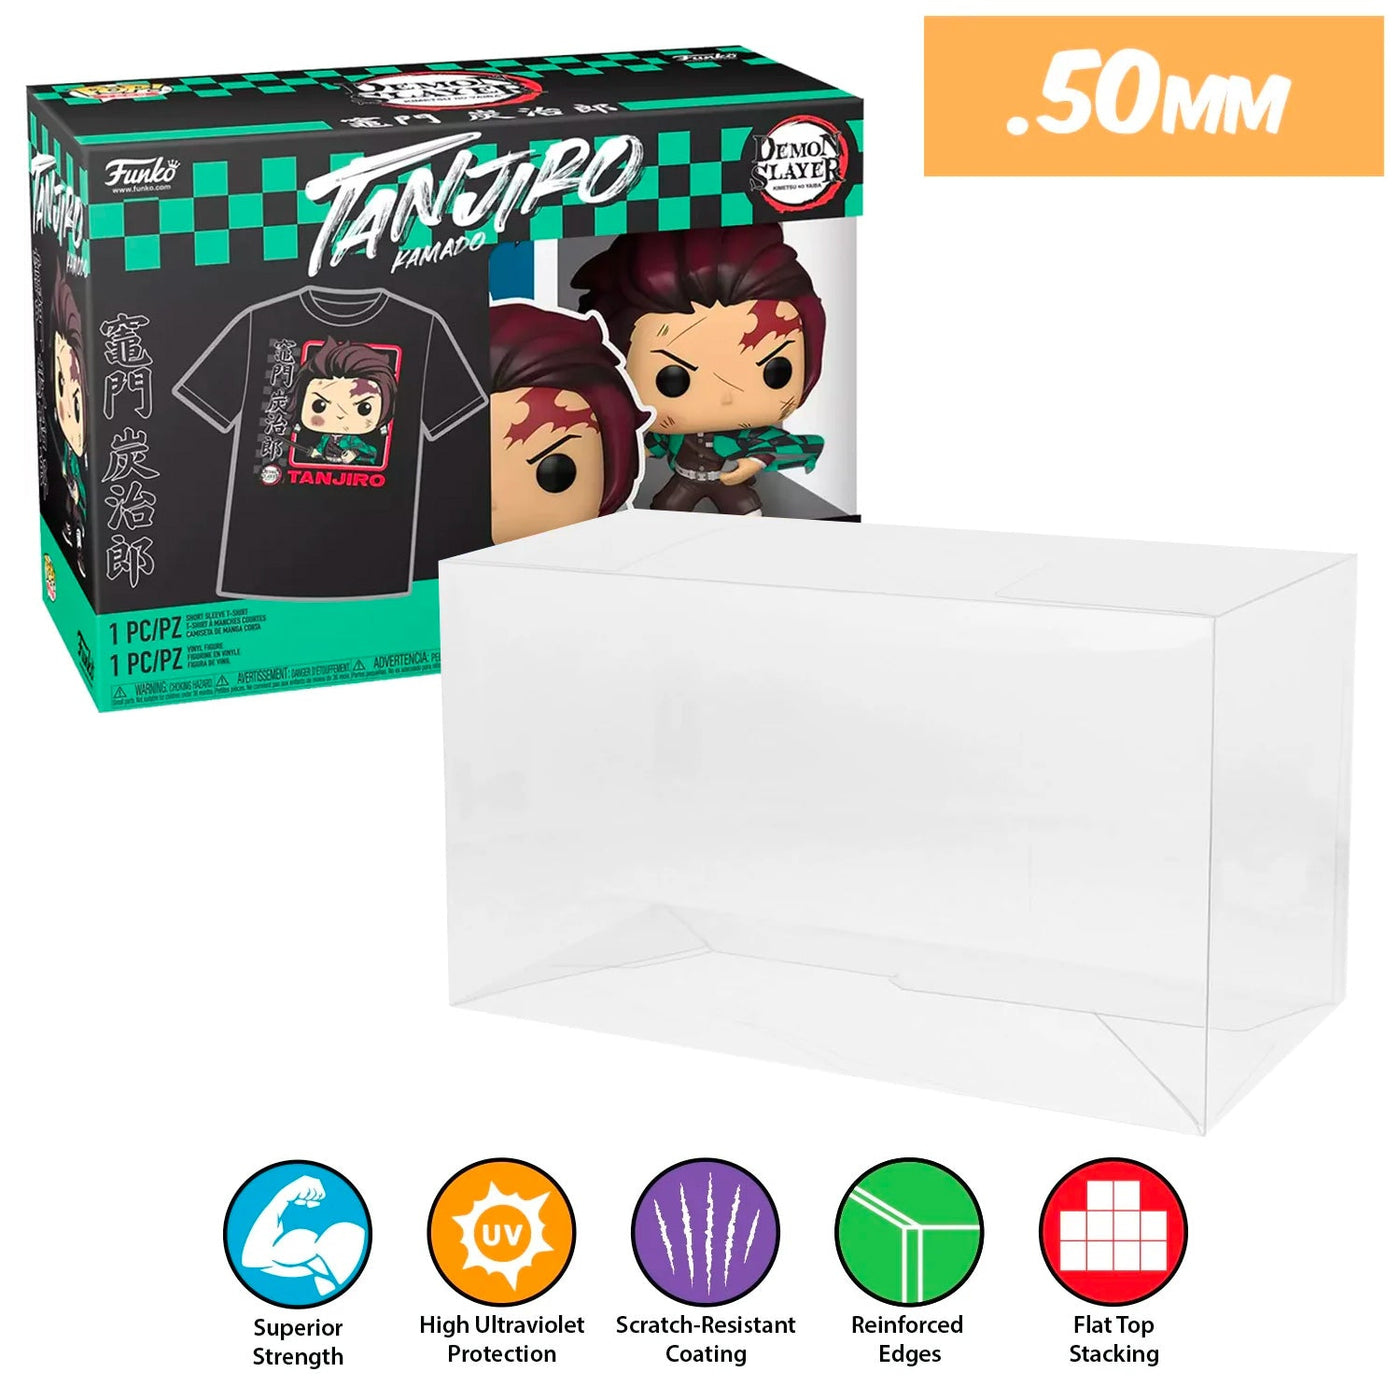 pop & tee demon slayer tanjiro best funko pop protectors thick strong uv scratch flat top stack vinyl display geek plastic shield vaulted eco armor fits collect protect display case kollector protector